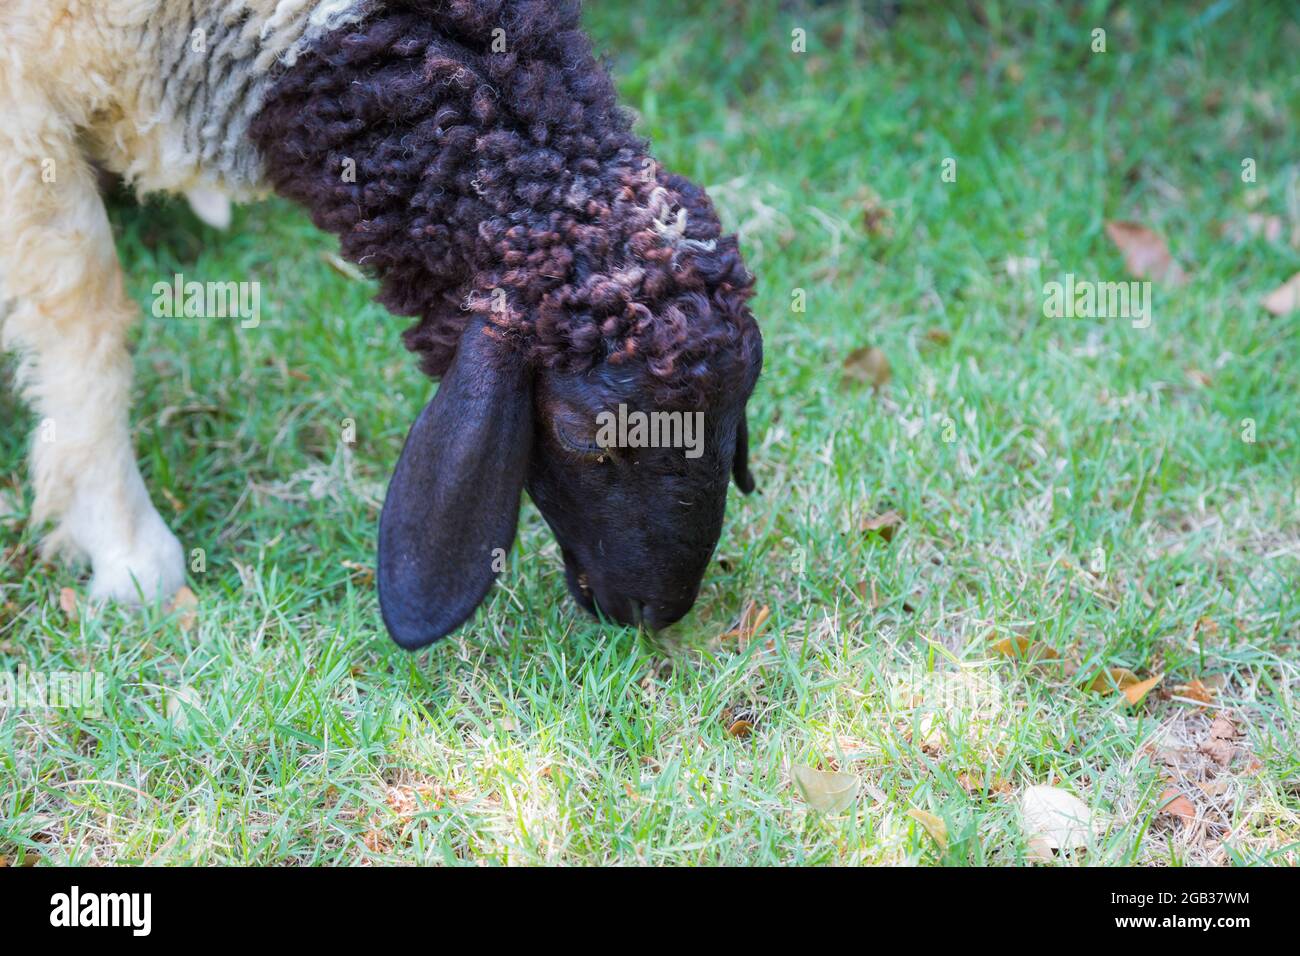 Close up of the face of a lamb eating grass background Stock Photo